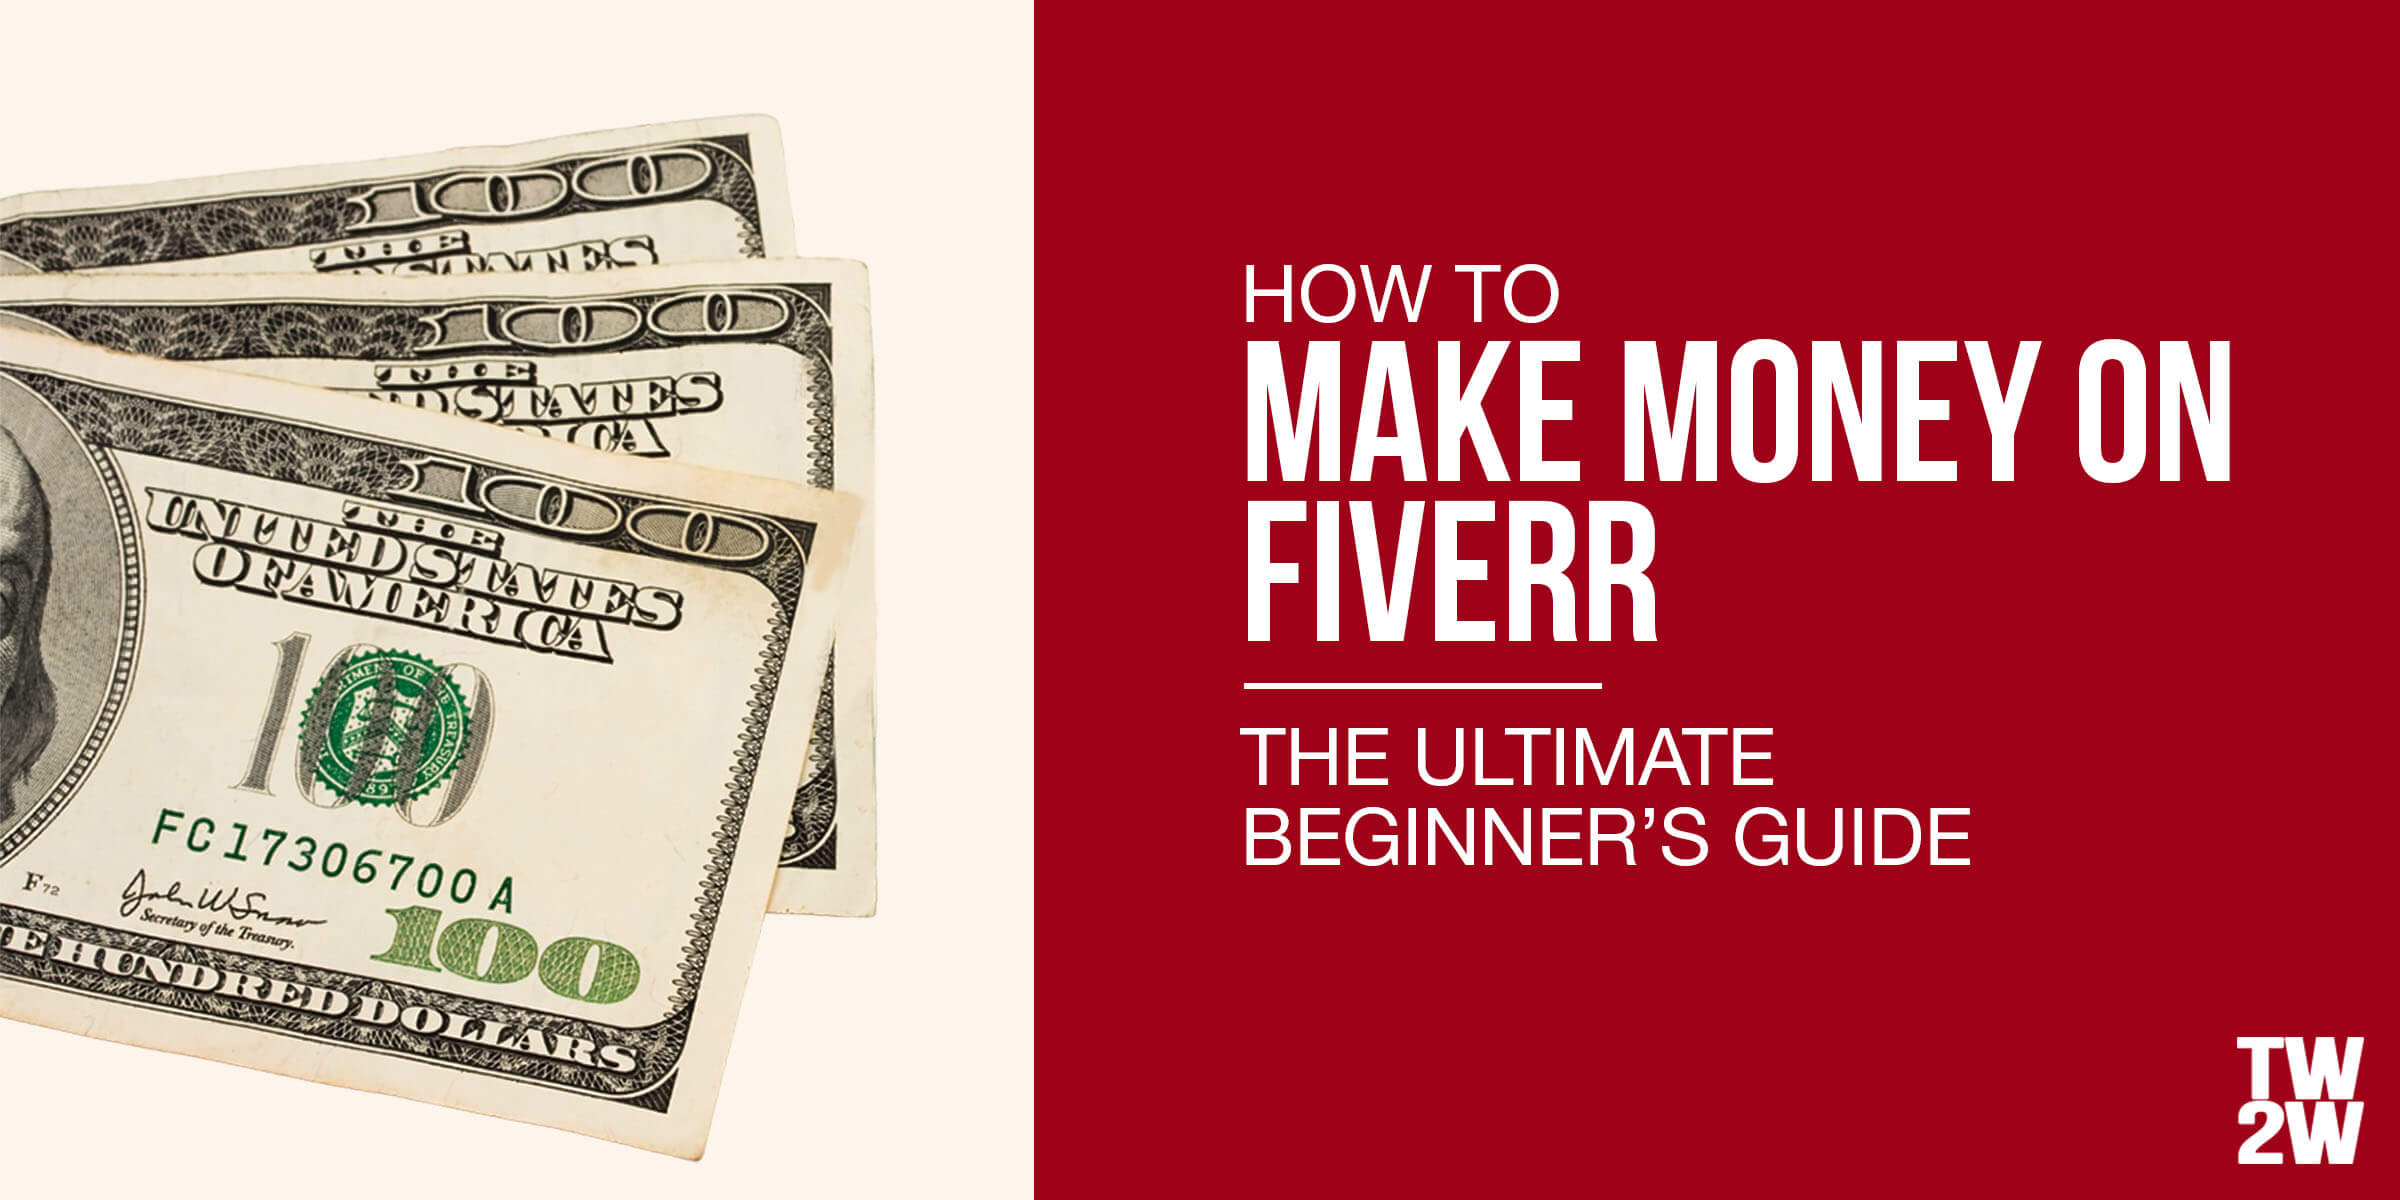 How difficult is it to make money on Fiverr?